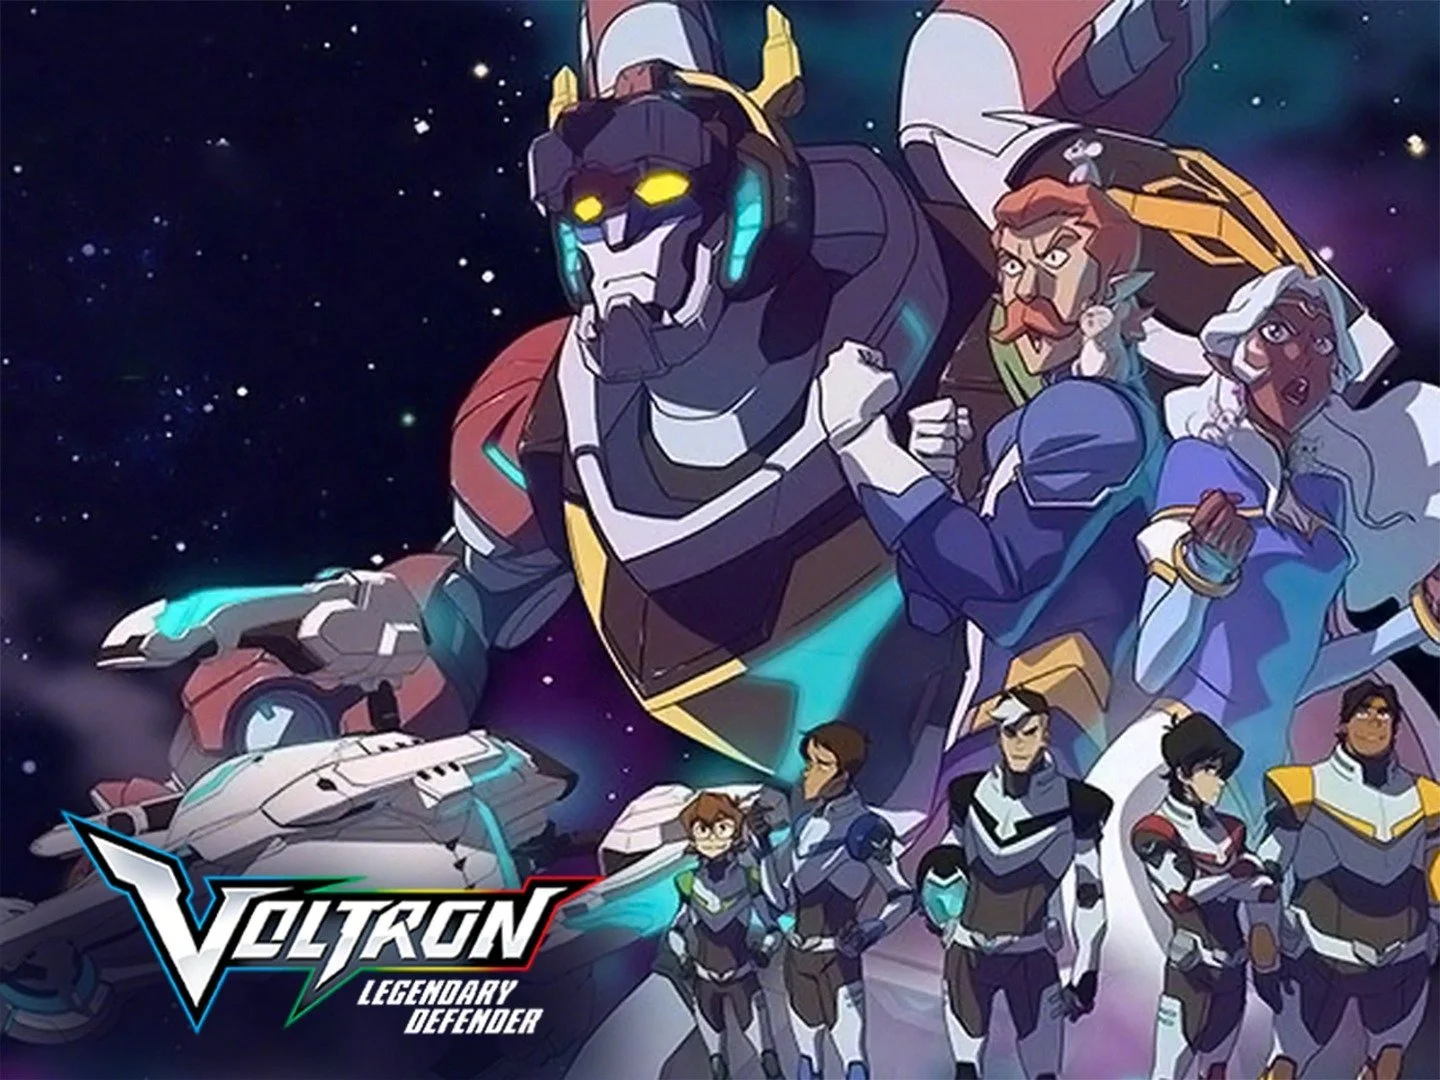 "Voltron" will shoot live action, directed by Rawson Marshall Thurber